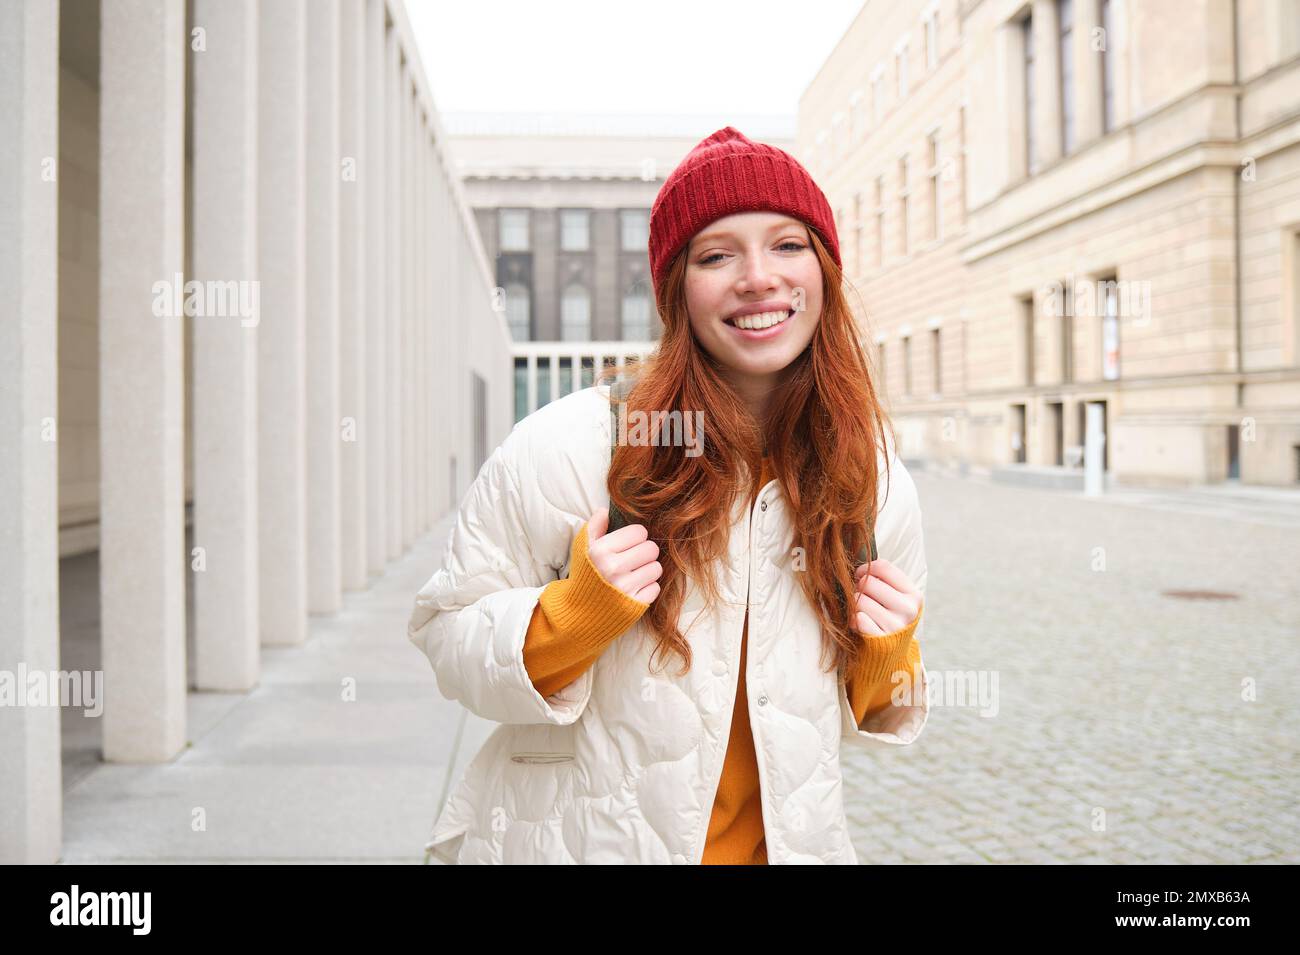 Female tourist in red hat with backpack, sightseeing, explores historical landmarks on her trip around europe, smiling and posing on street. Stock Photo